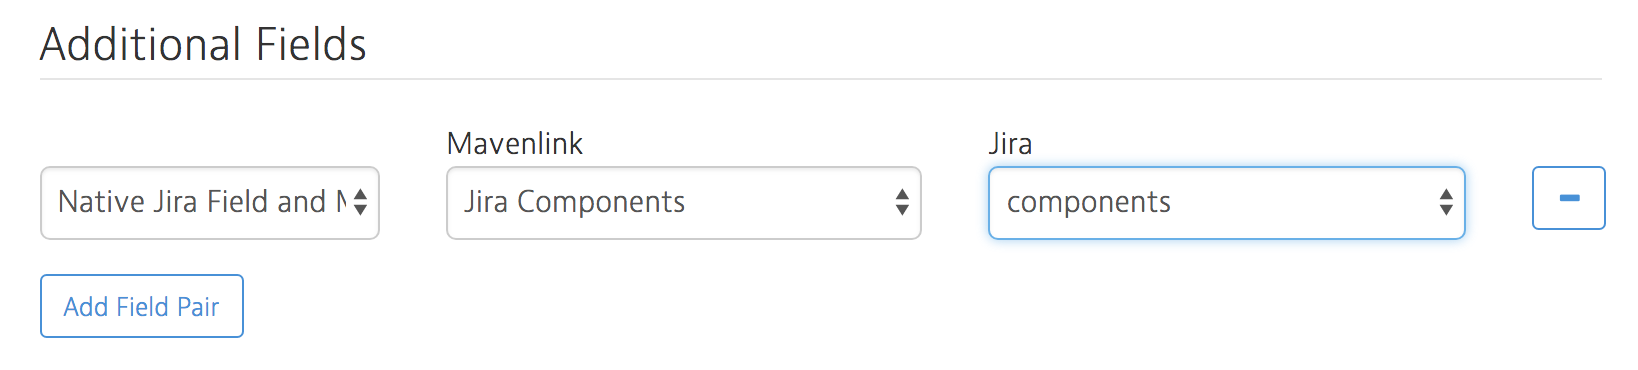 Jira_Integration_Additional_Fields_section.png